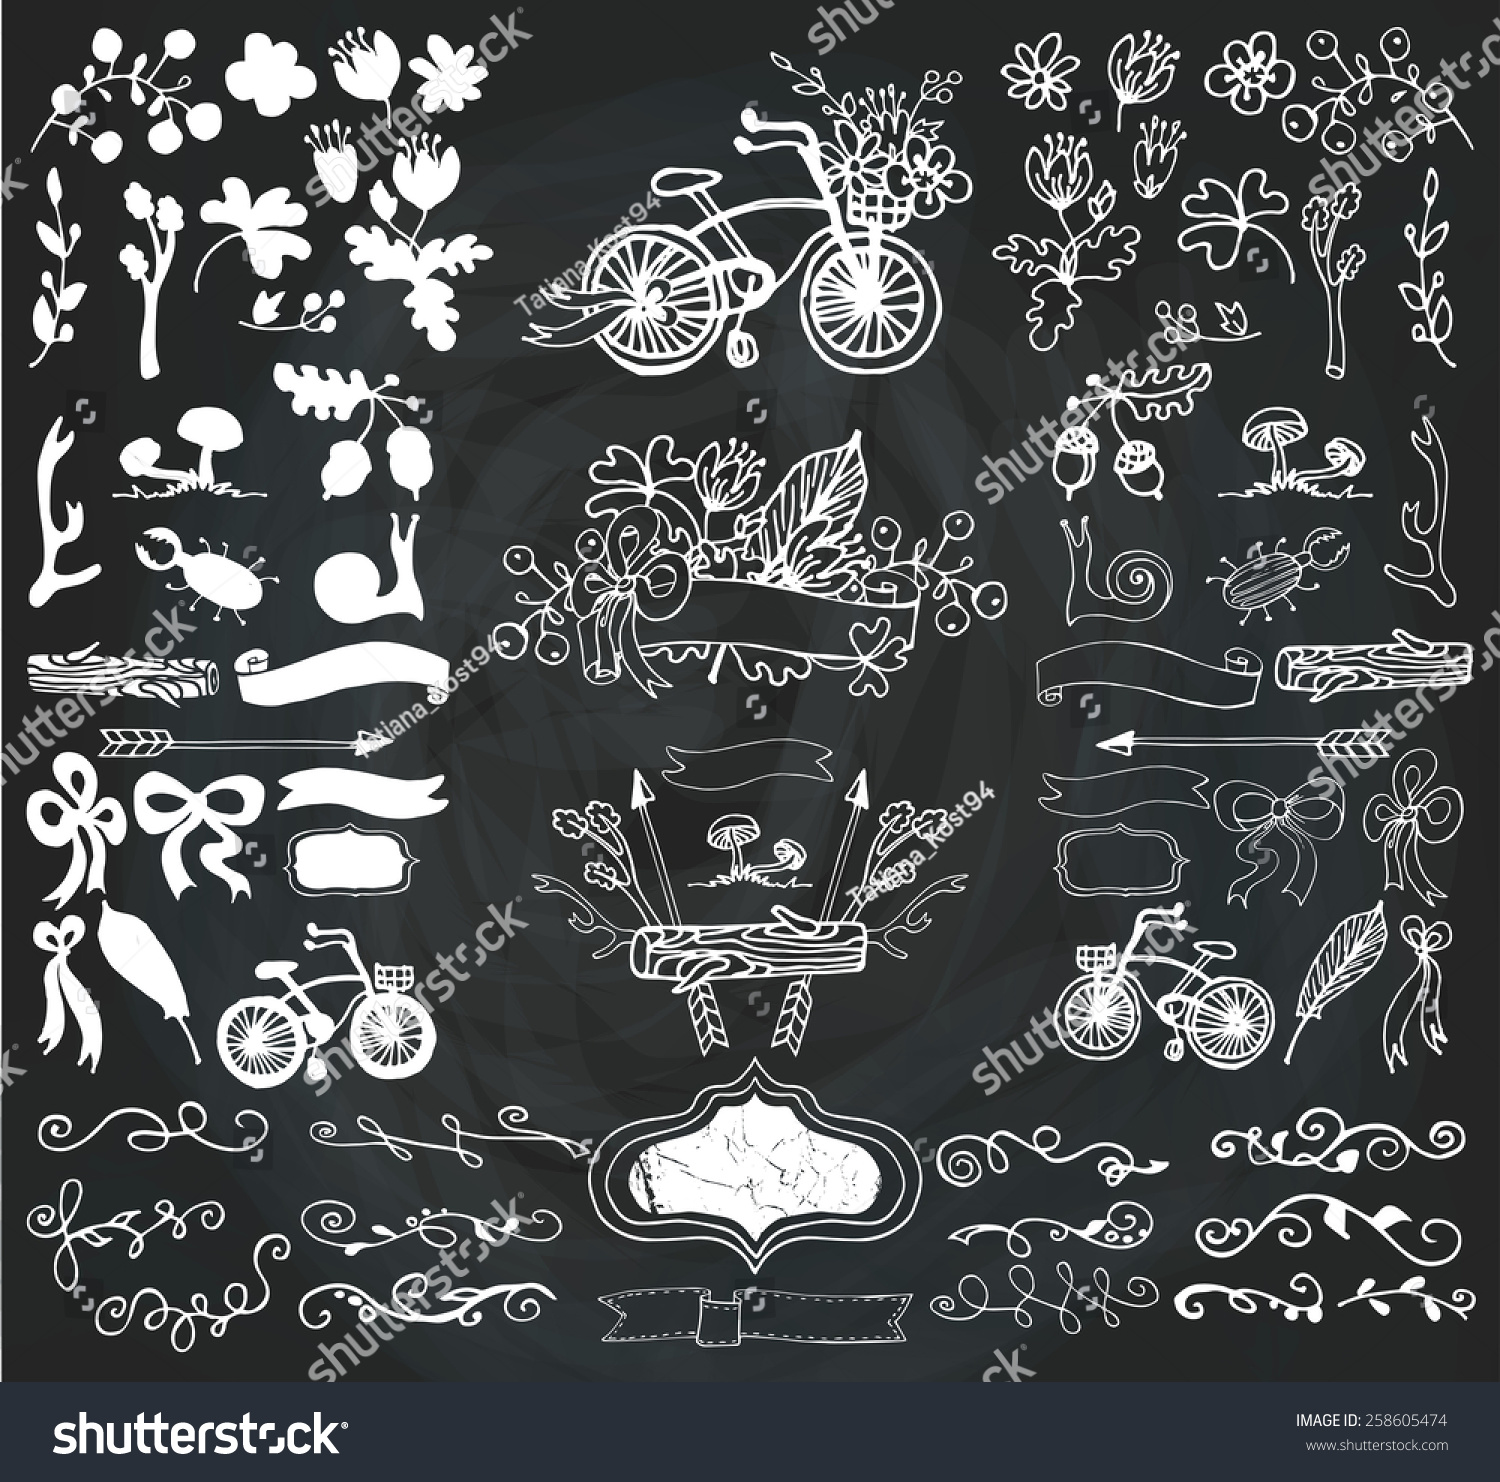 Doodle Floral Group Sethand Sketch Vintage Stock Vector Royalty